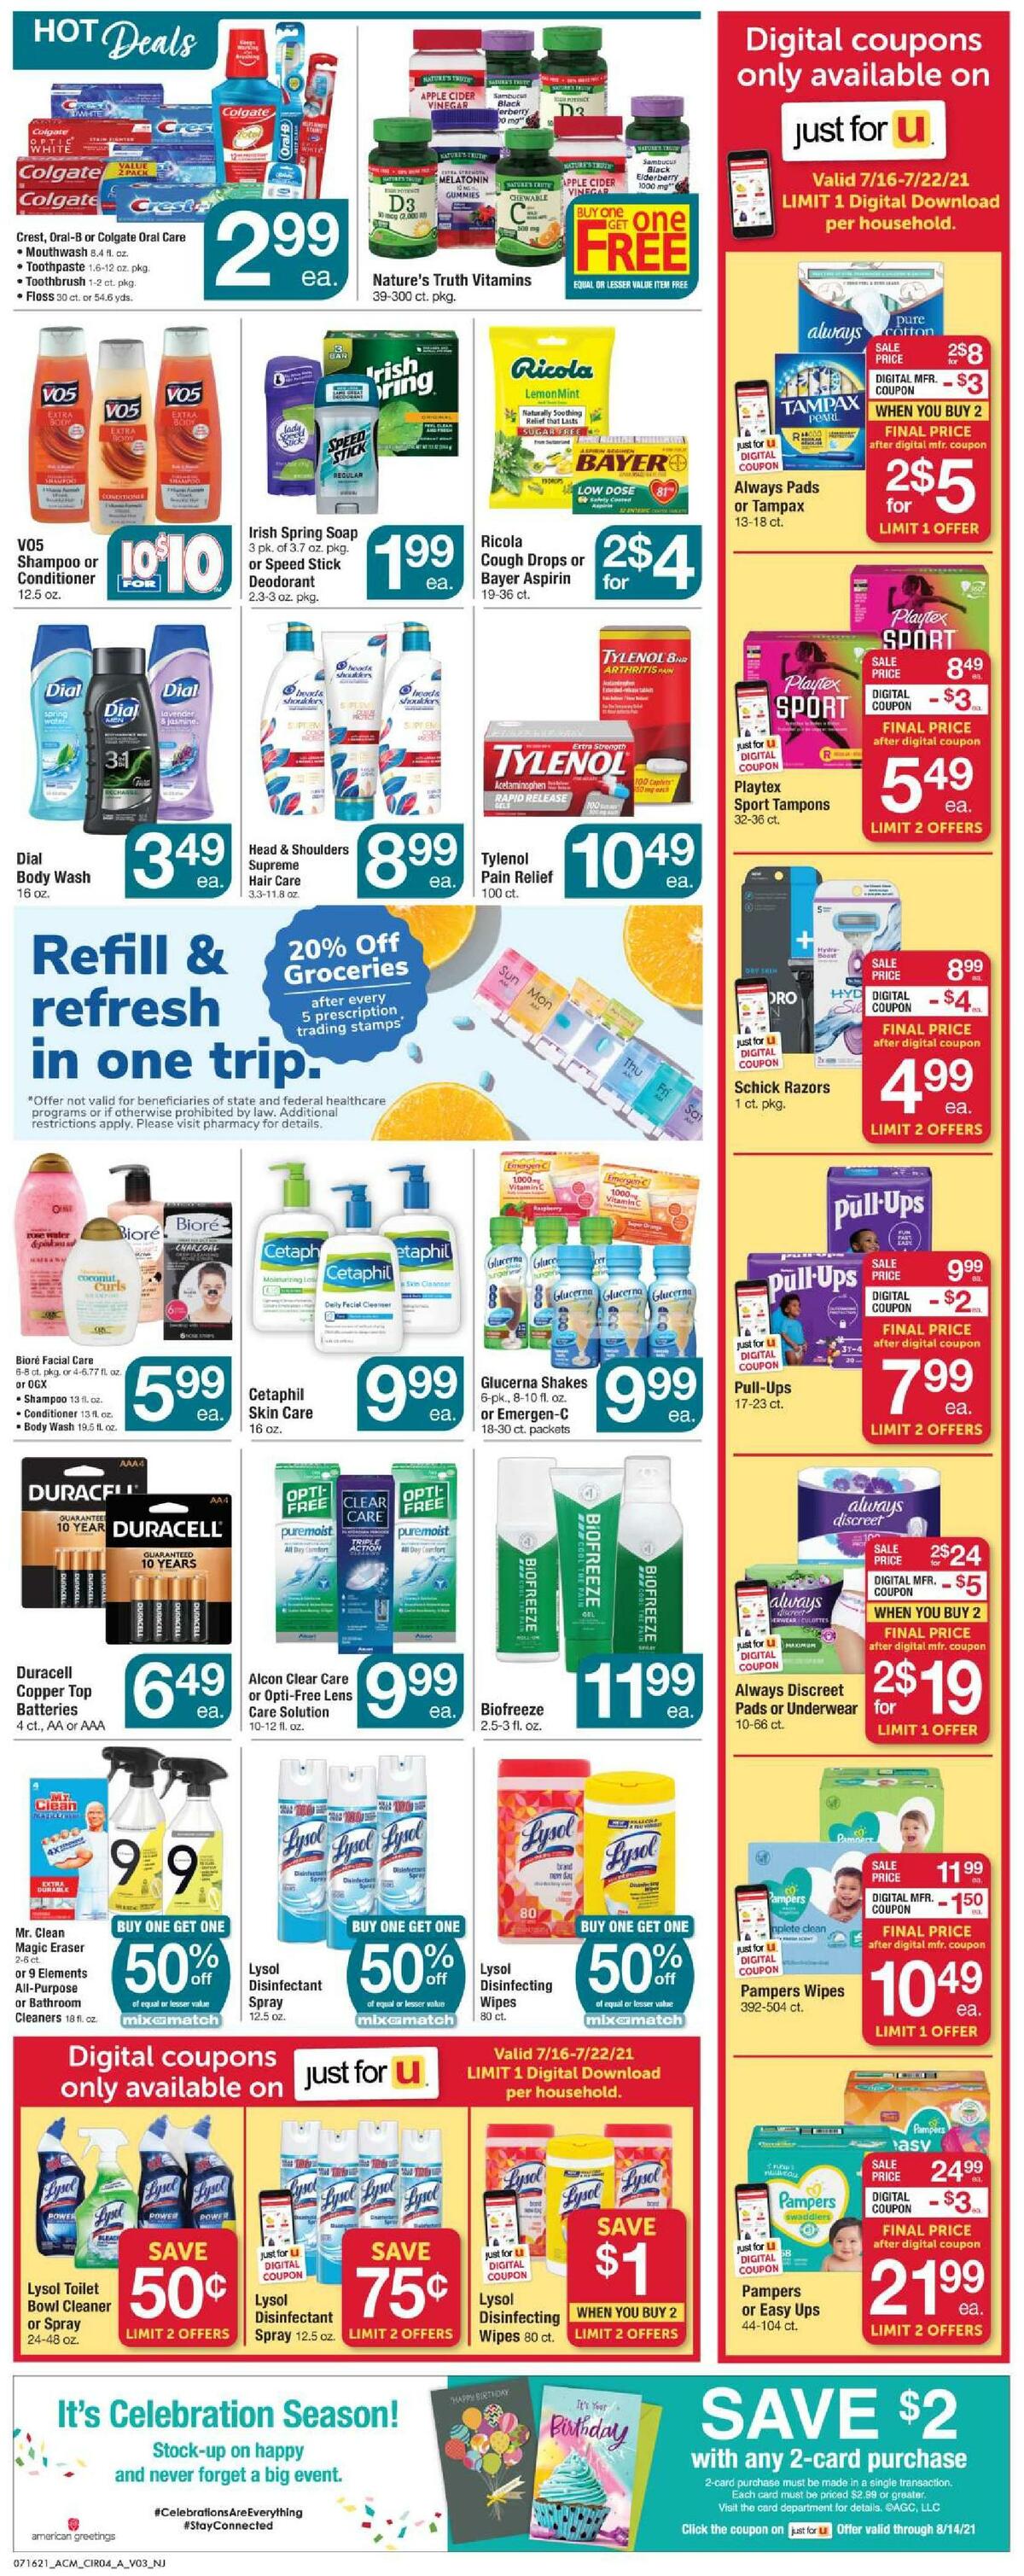 ACME Markets Weekly Ad from July 16